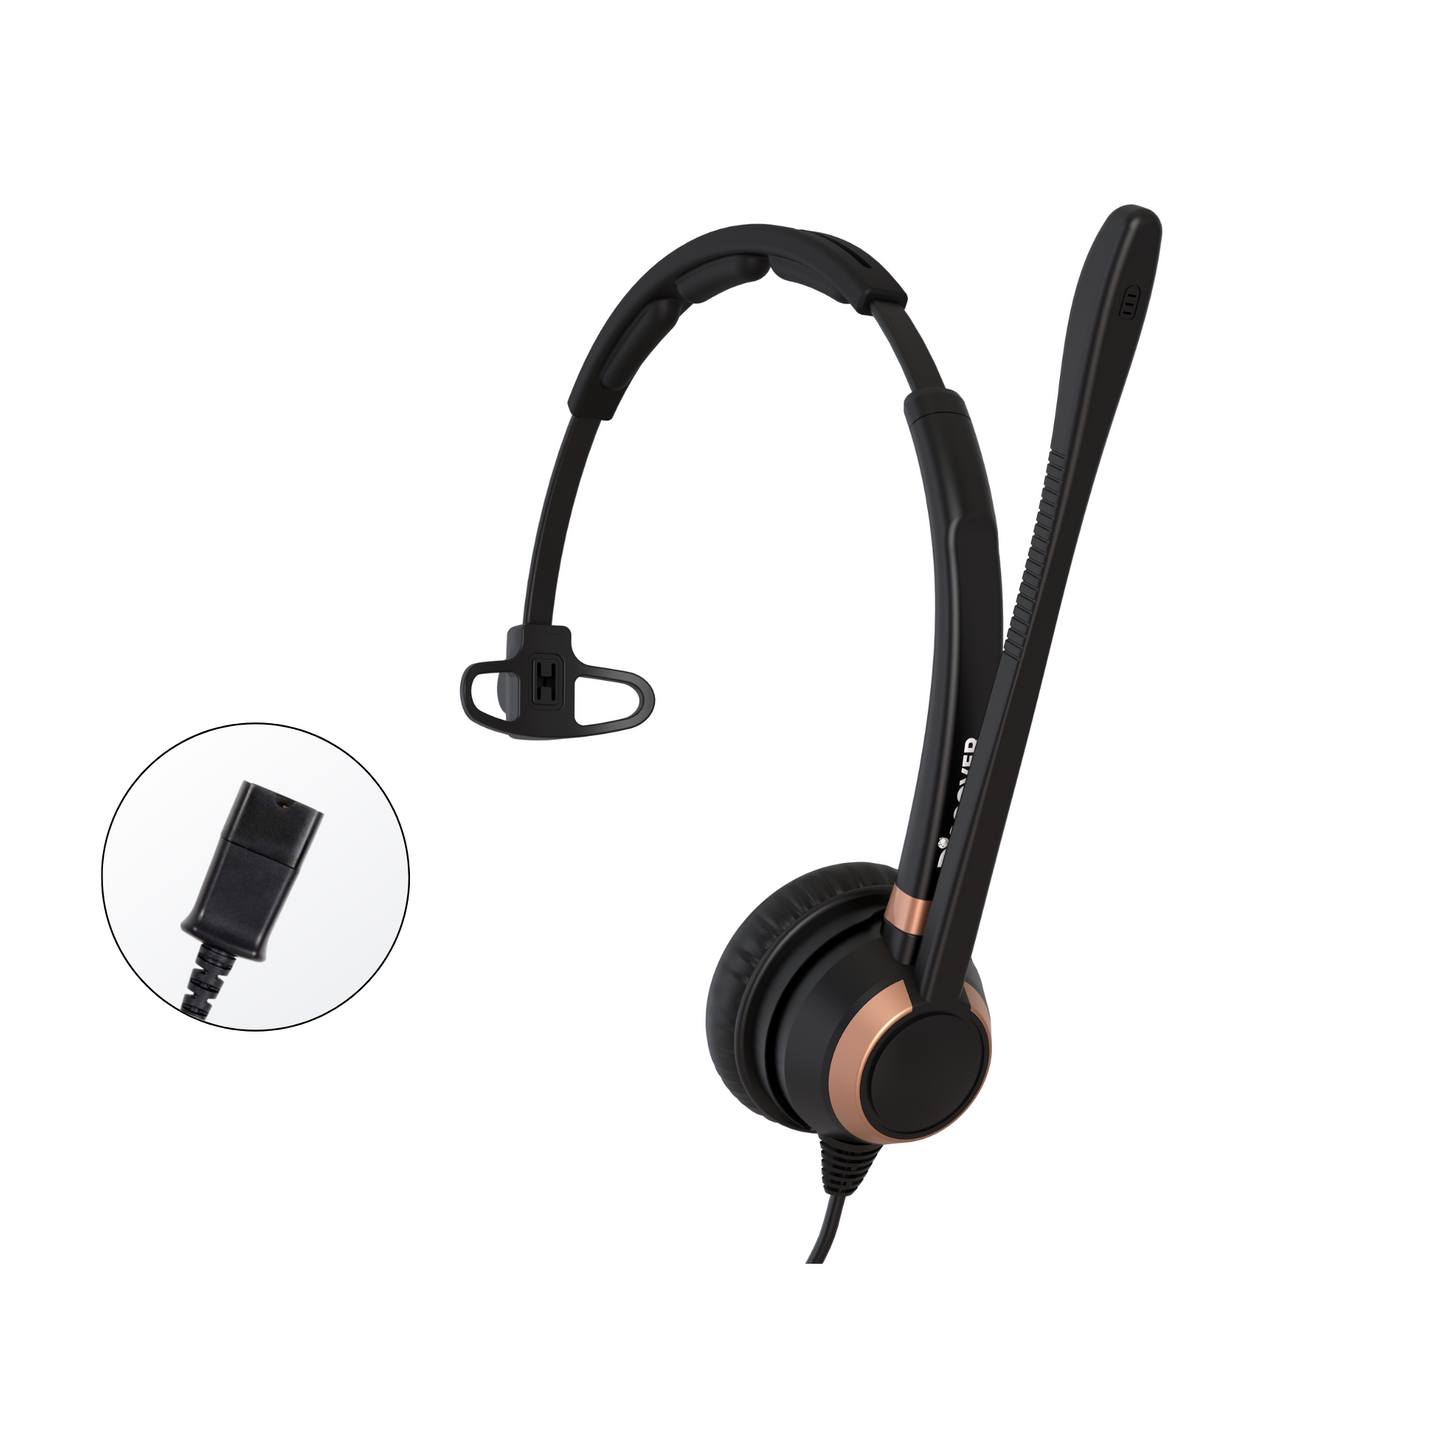 Discover D700 QD Series Wired Headset